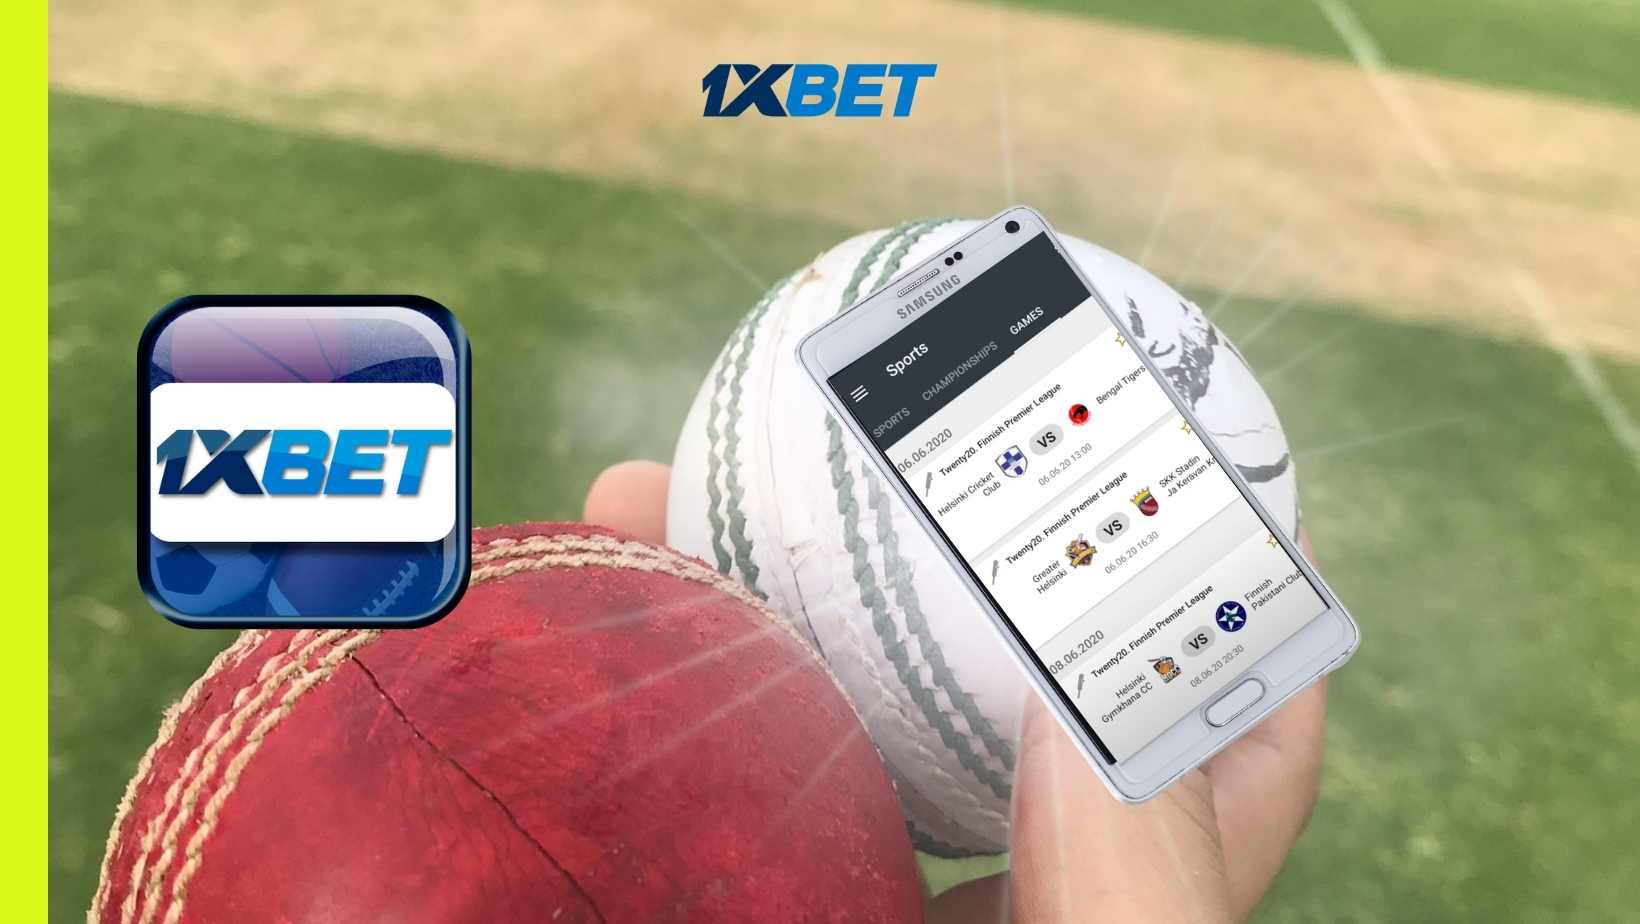 The 1xbet app for betting on cricket in India